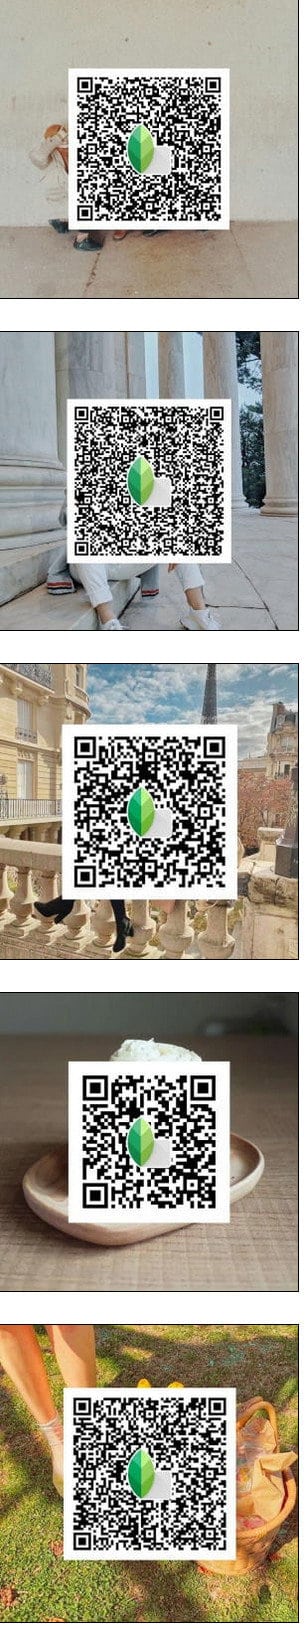 Snapseed Presets QR Codes